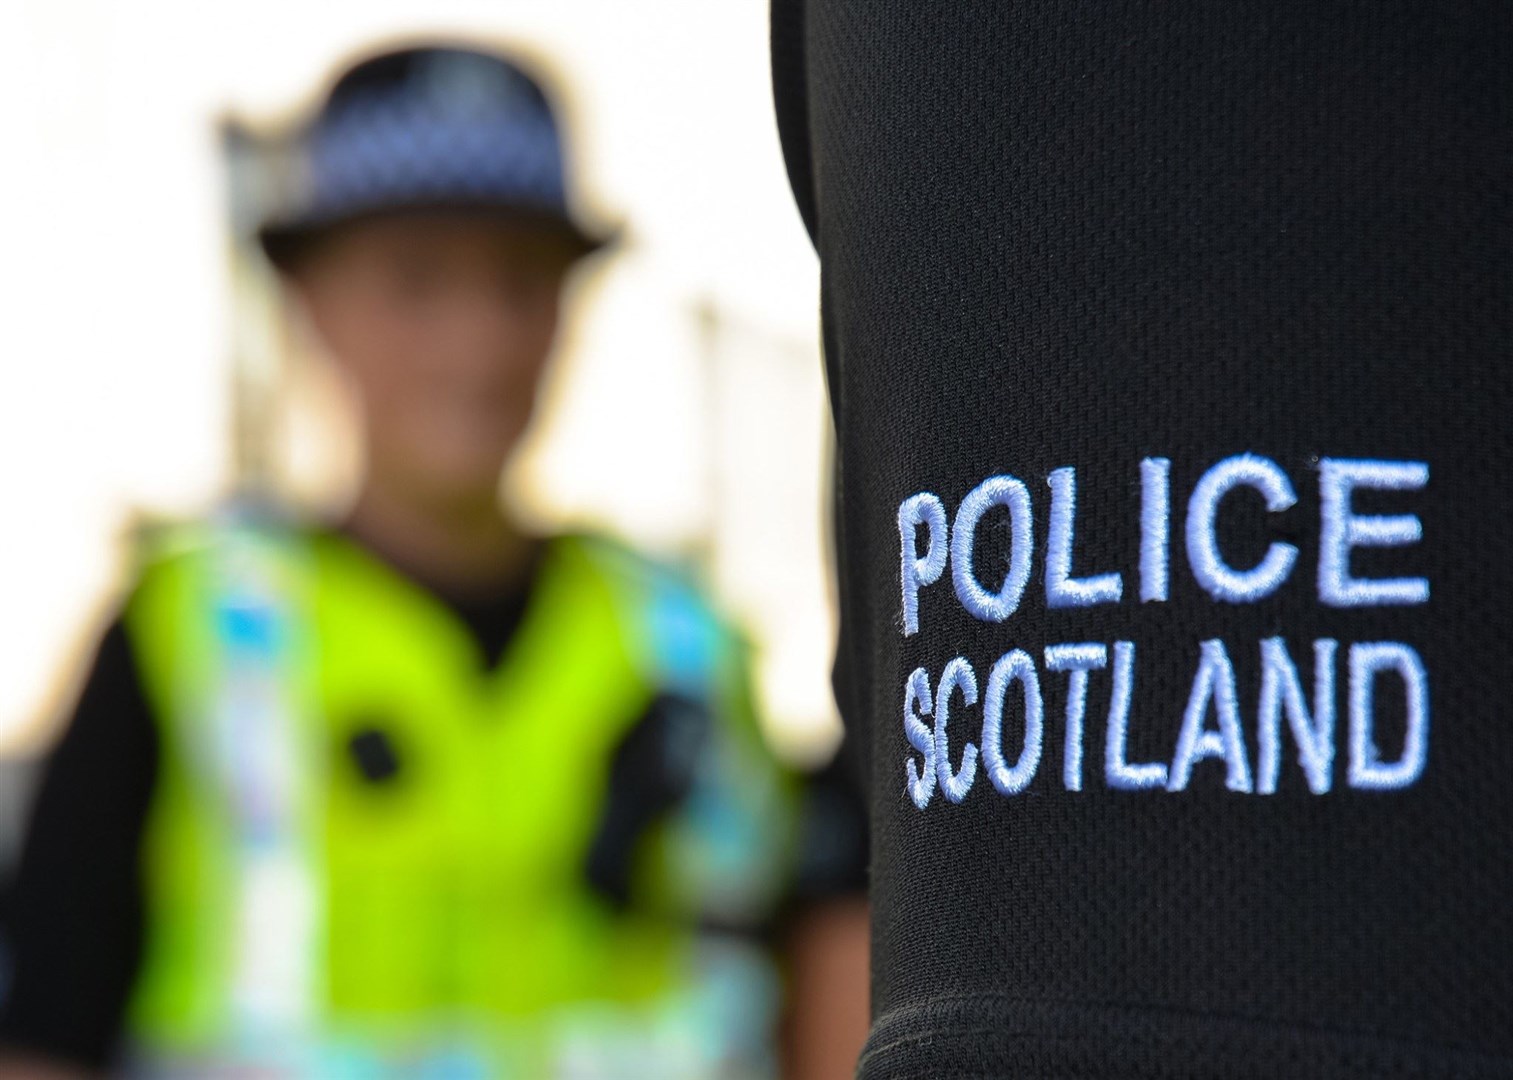 Police Scotland followed up on 20,967 coronavirus-related crimes over the past year.